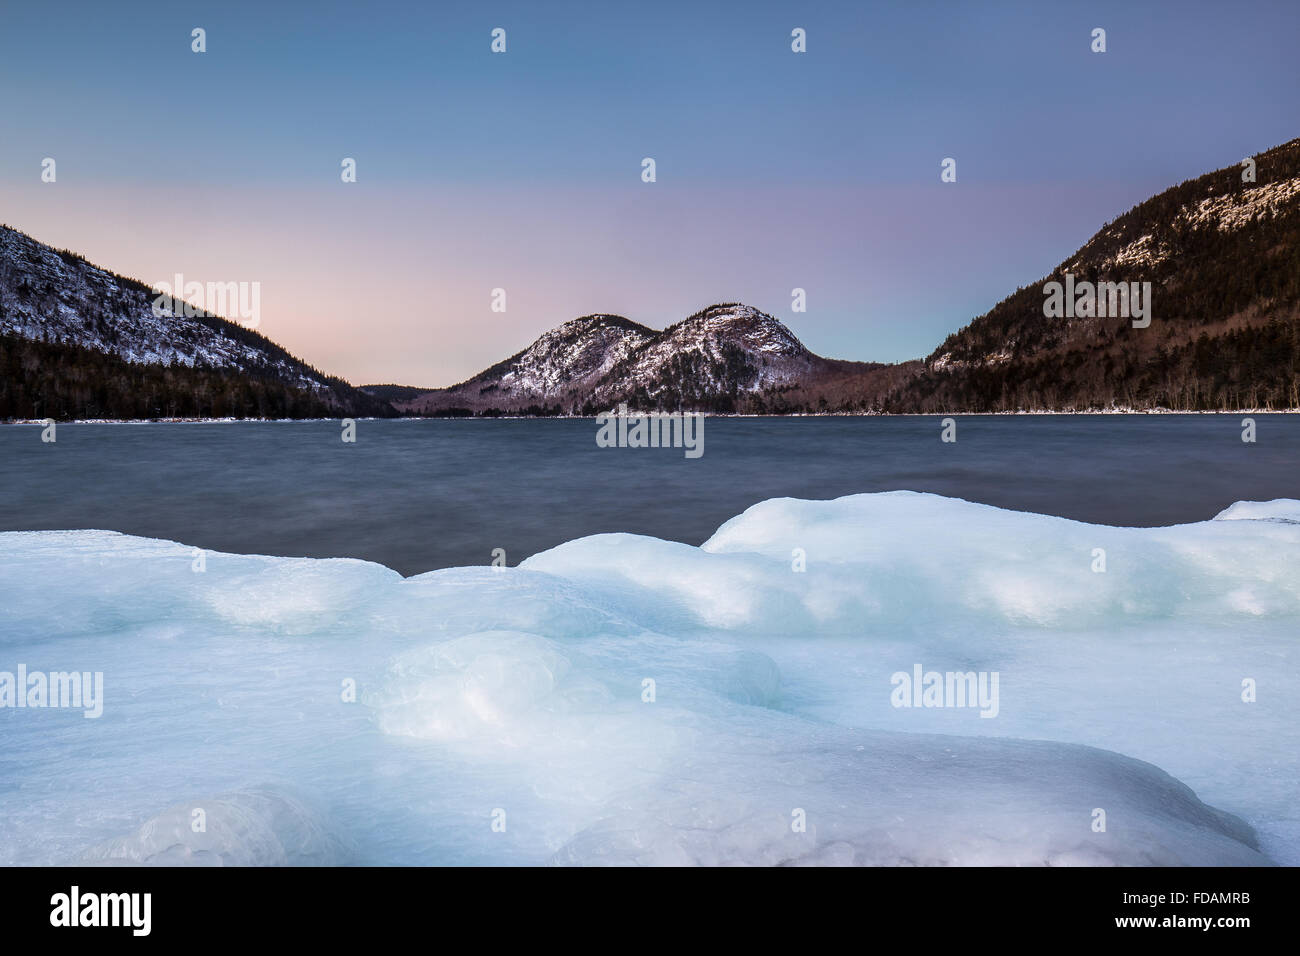 The Bubbles, snow capped and seen from the icy shore of Jordan Pond in Acadia National Park, Mount Desert Island, Maine. Stock Photo